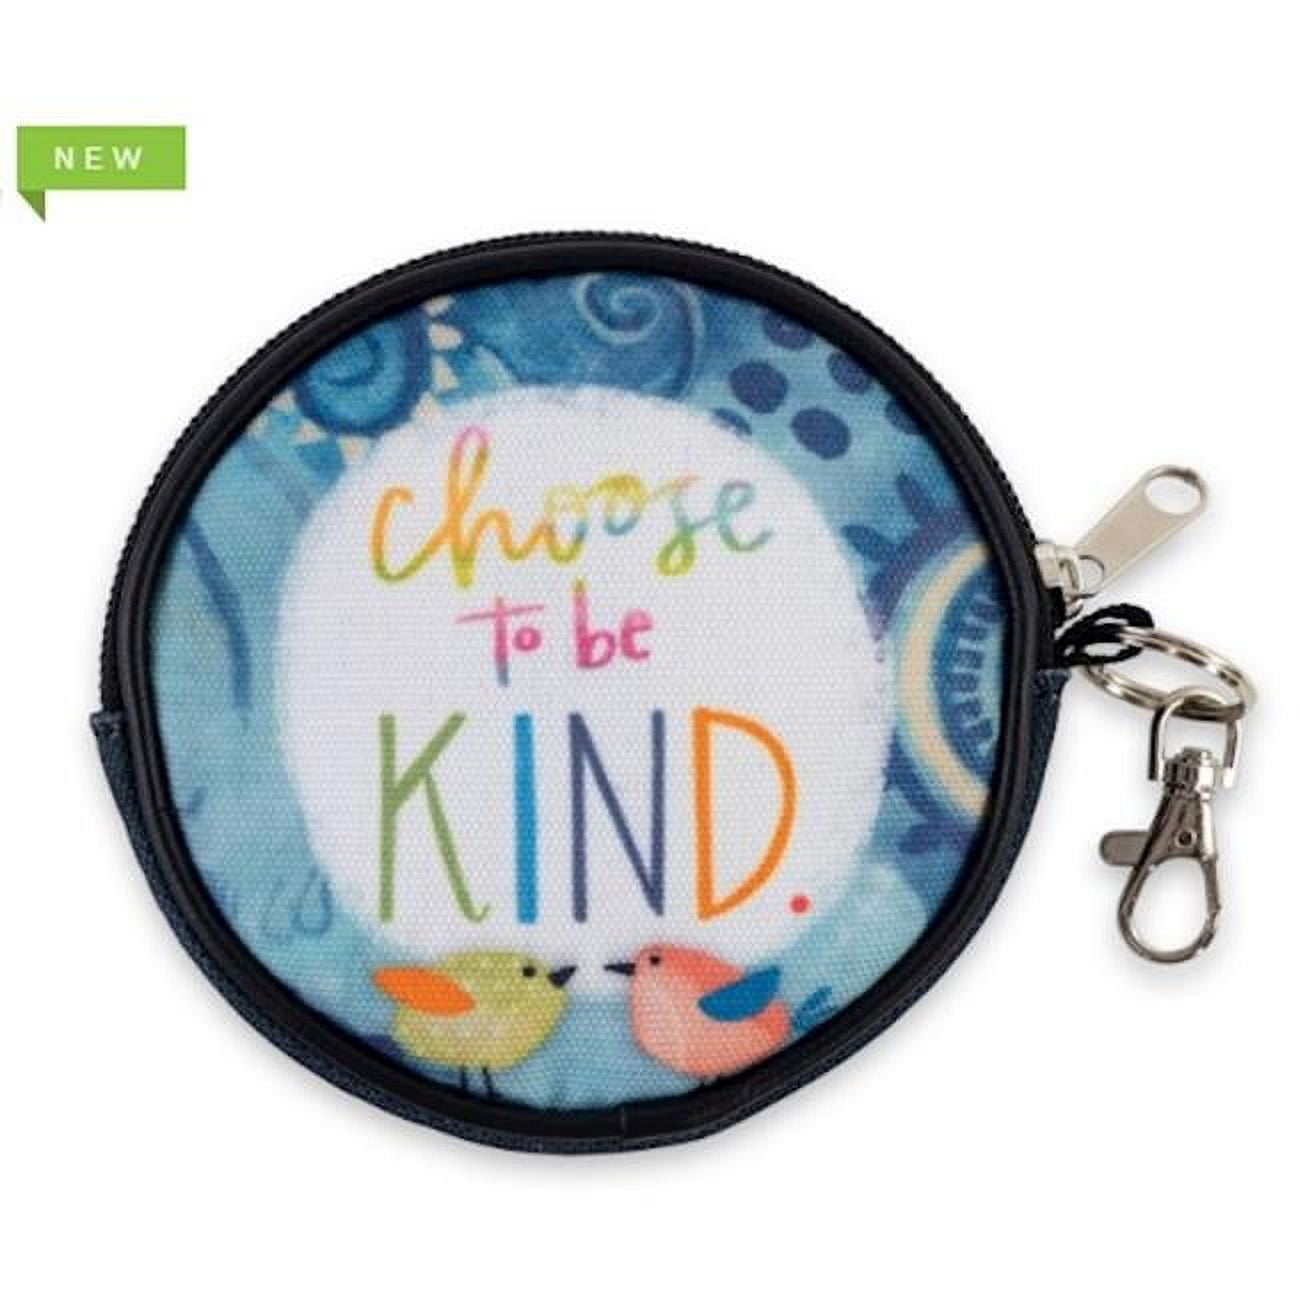 Picture of Brownlow Gift 265739 4 in. Diameter Coin Purse - Choose to Be Kind - Round